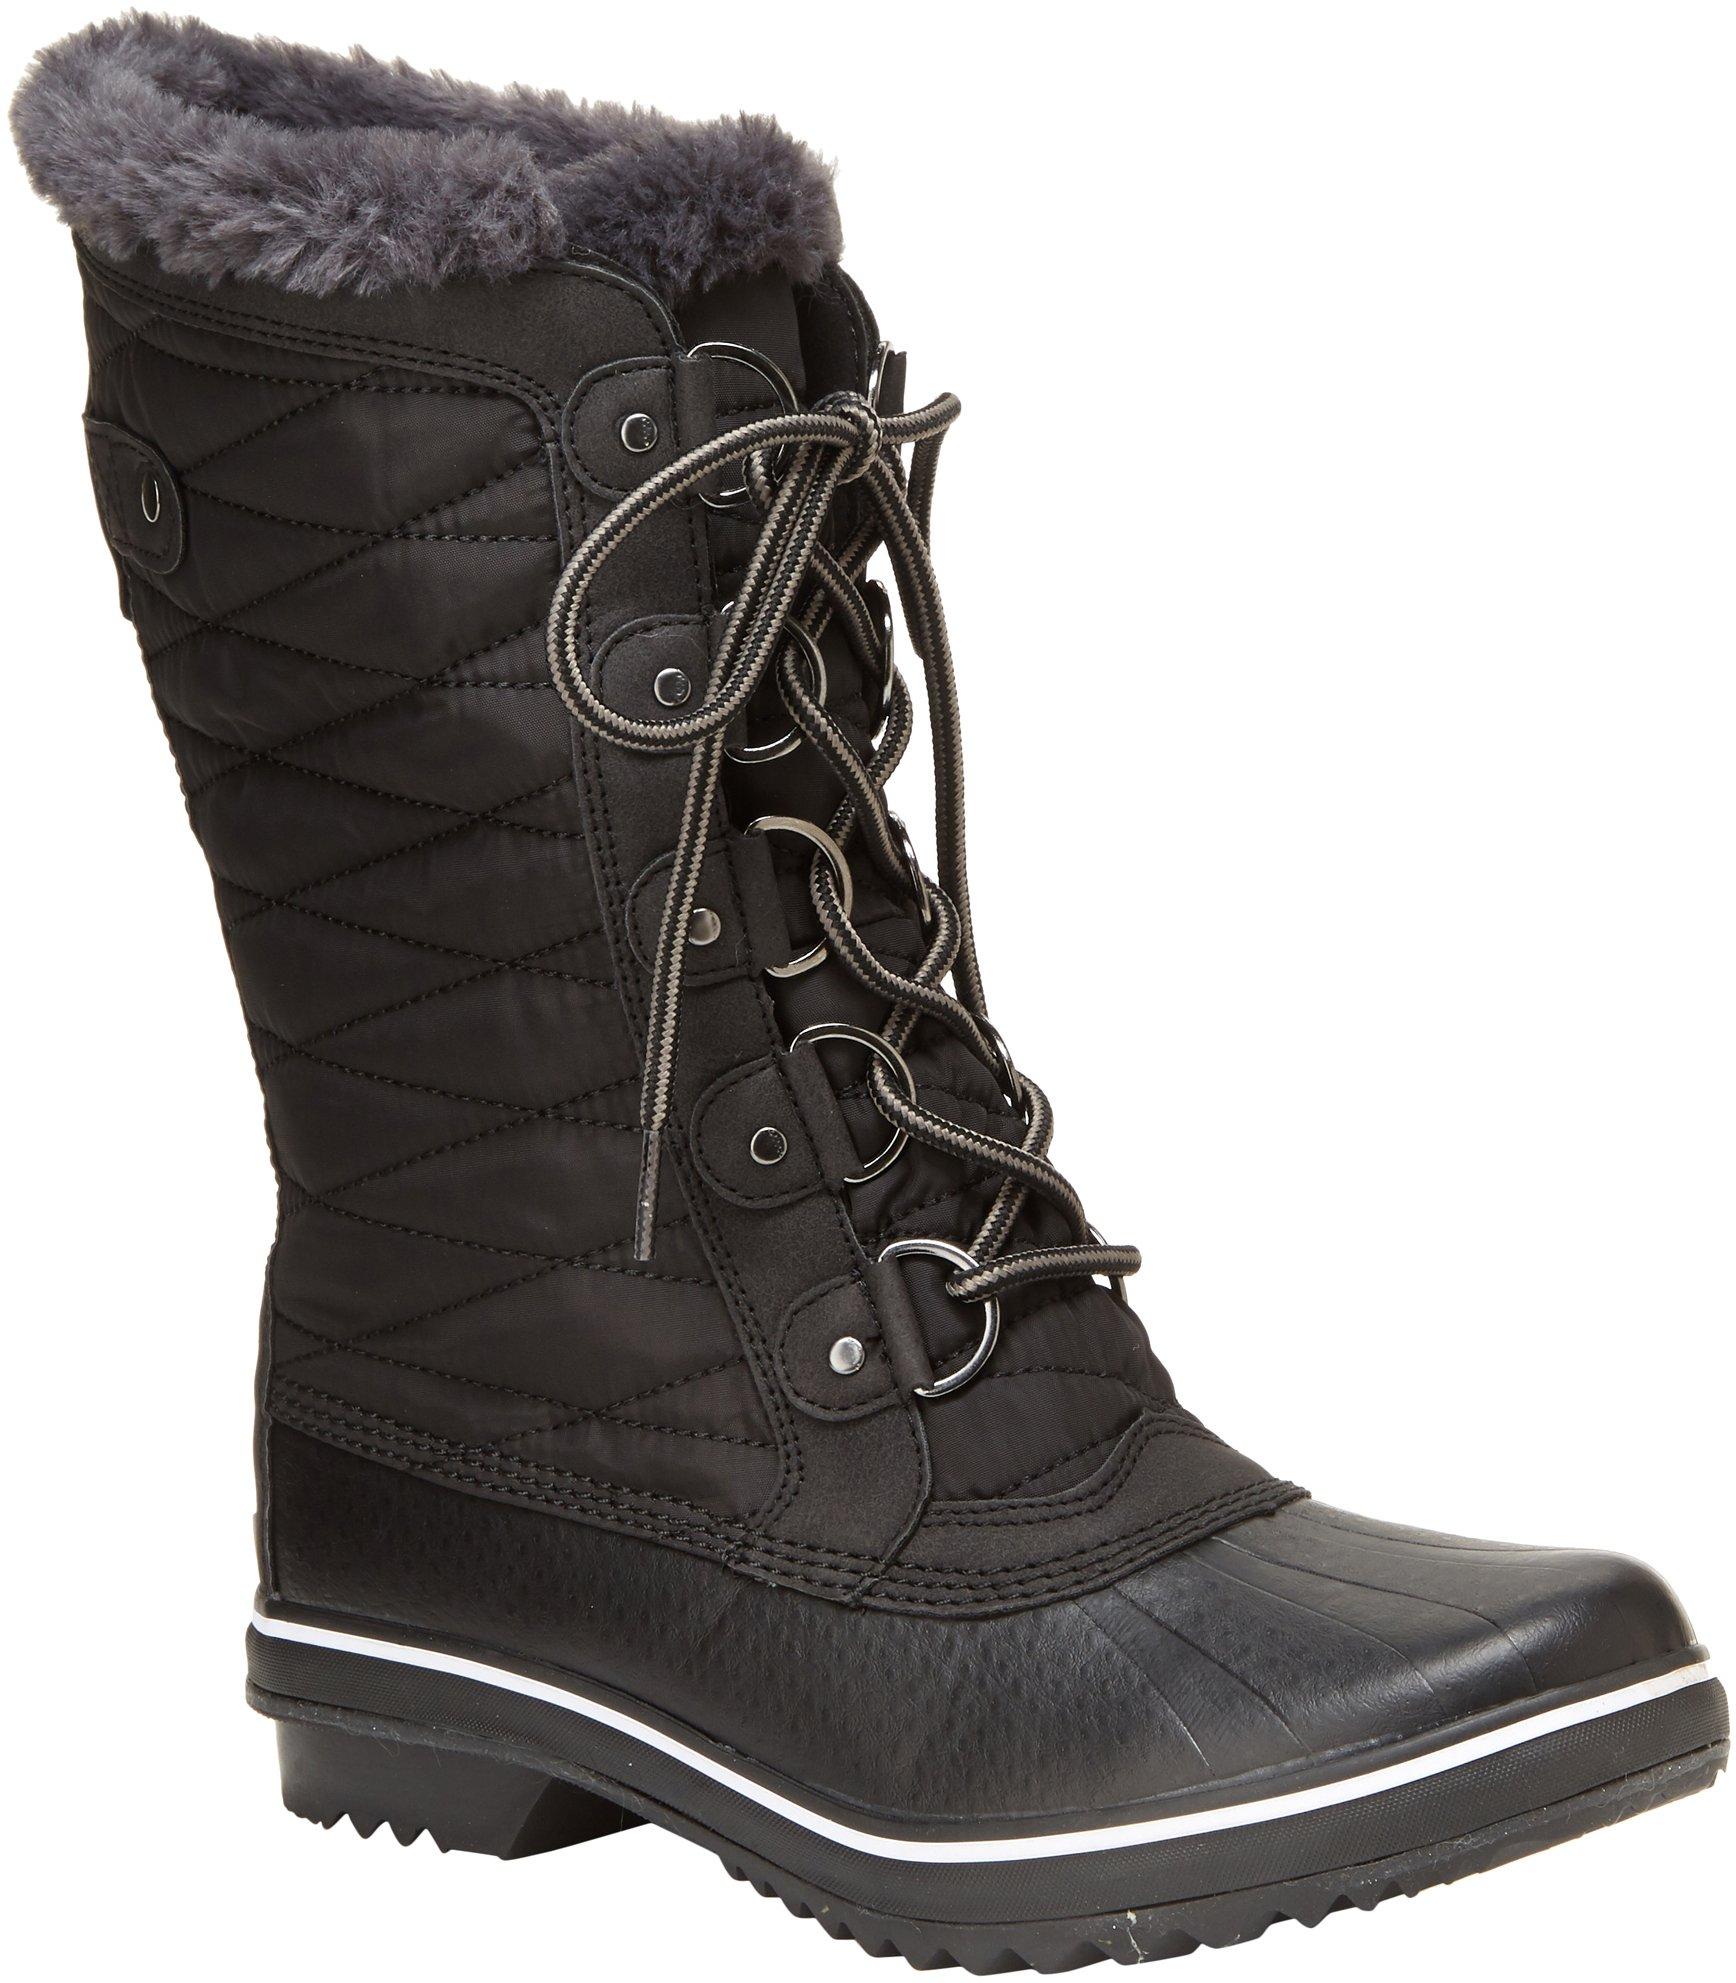 JBU Womens Chilly Water Resistant Boots